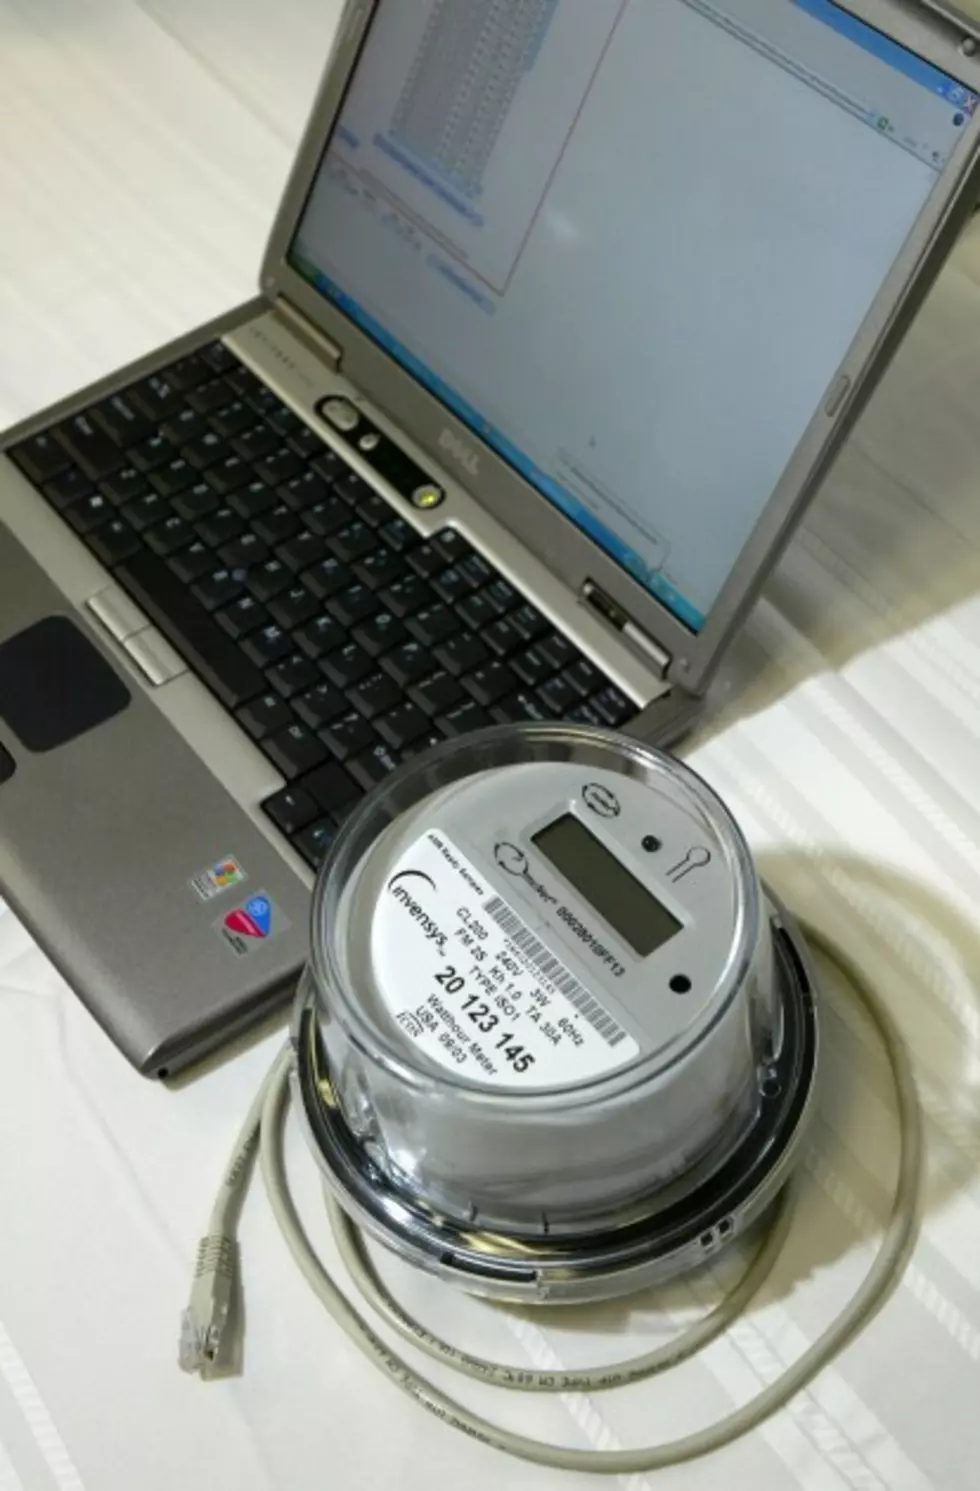 Are Smart Meters Good or Bad?